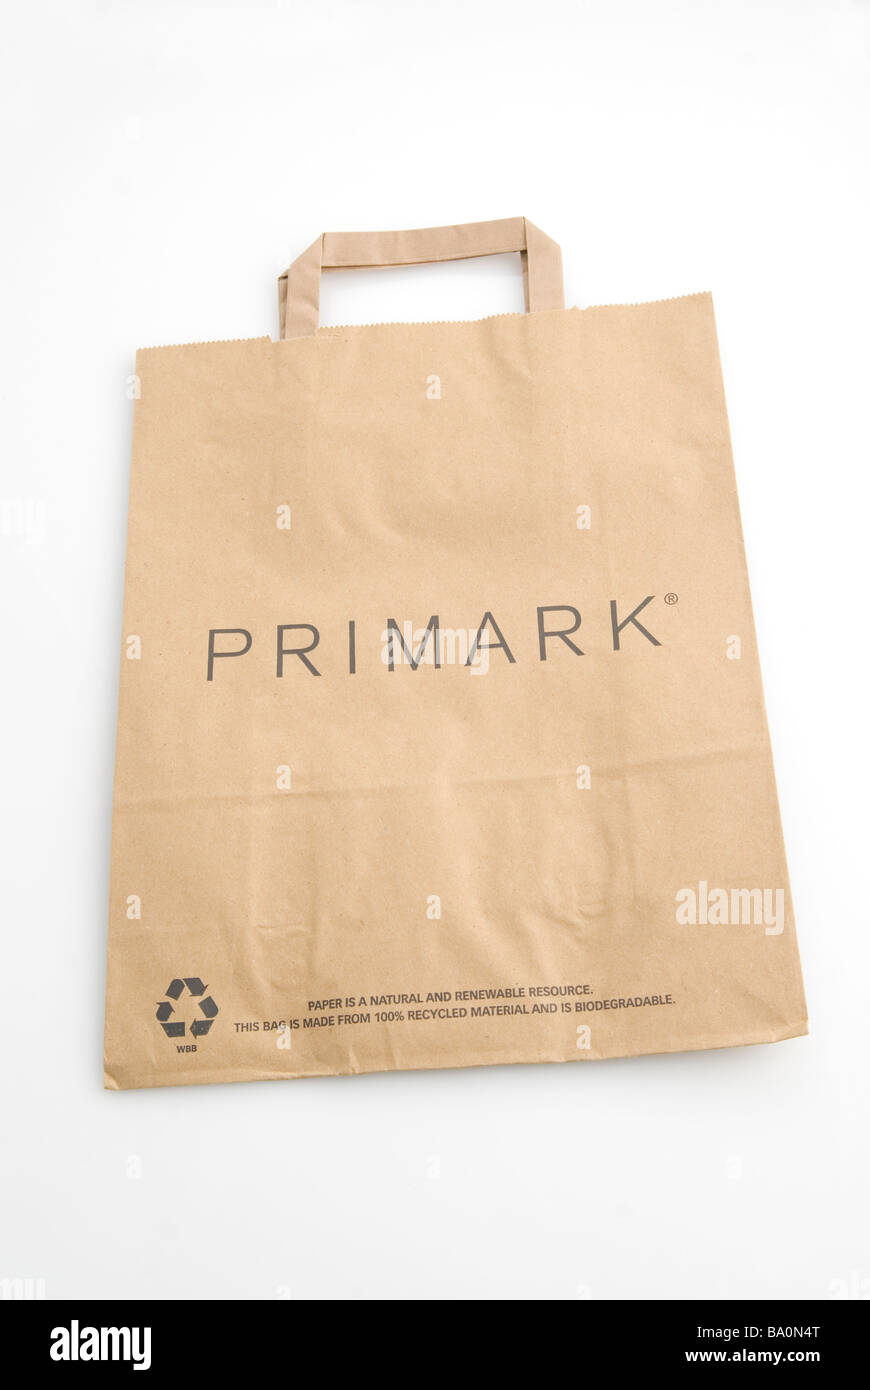 Primark brown paper bag isolated against a white background Stock Photo